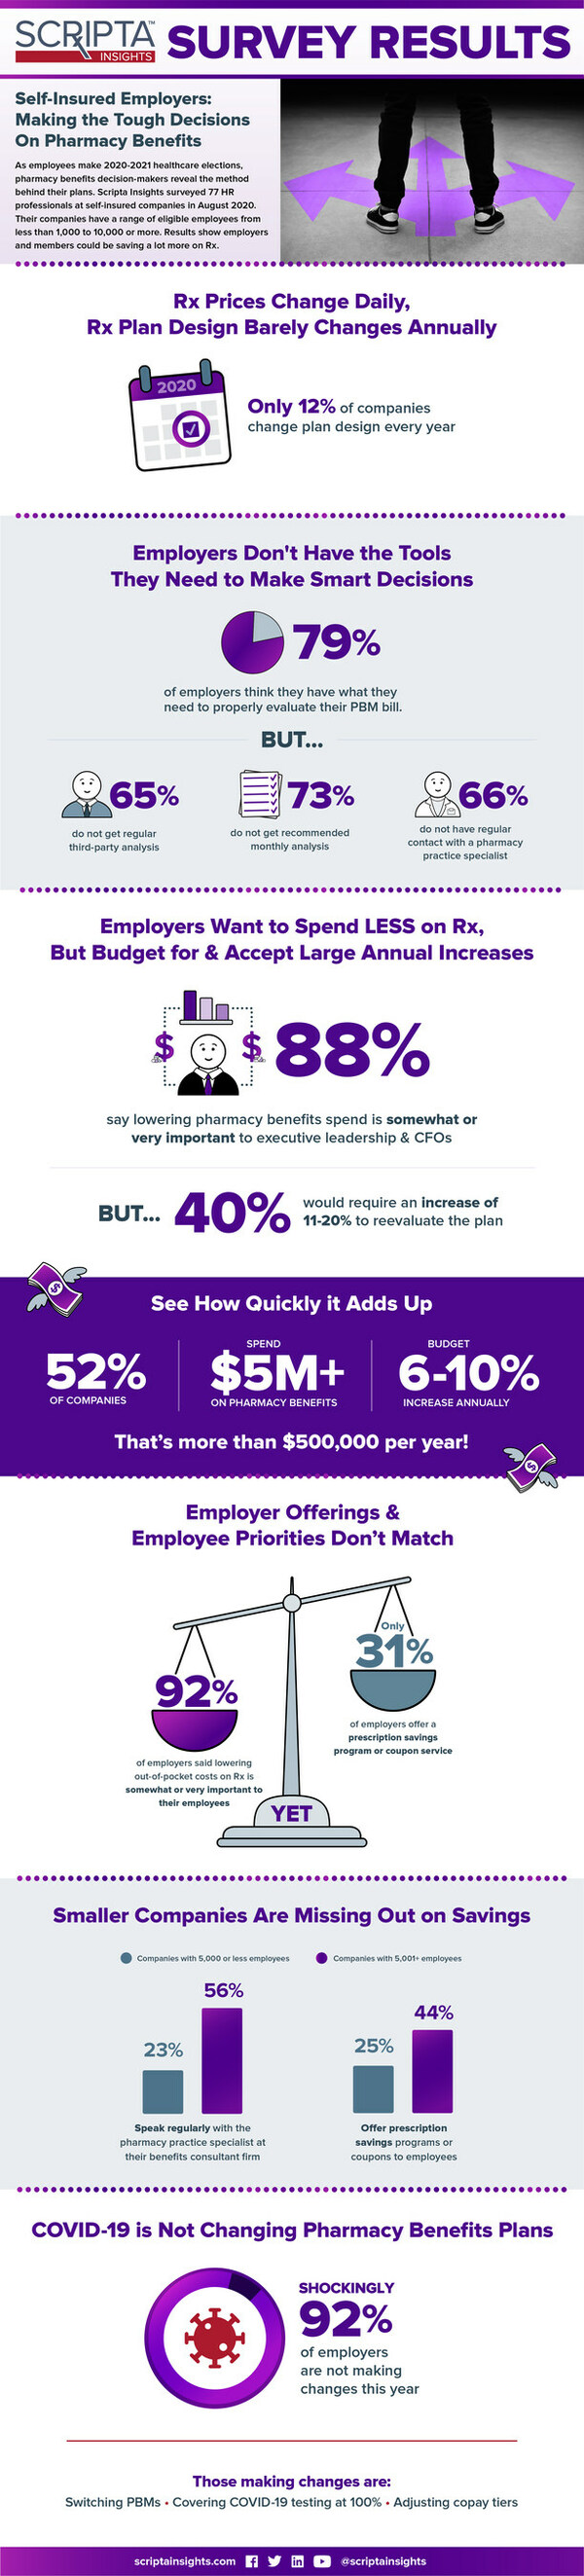 Scripta Insights released data from a survey of 77 HR professionals at self-insured companies. The results found that employers could be saving a lot more with the right tools and resources.